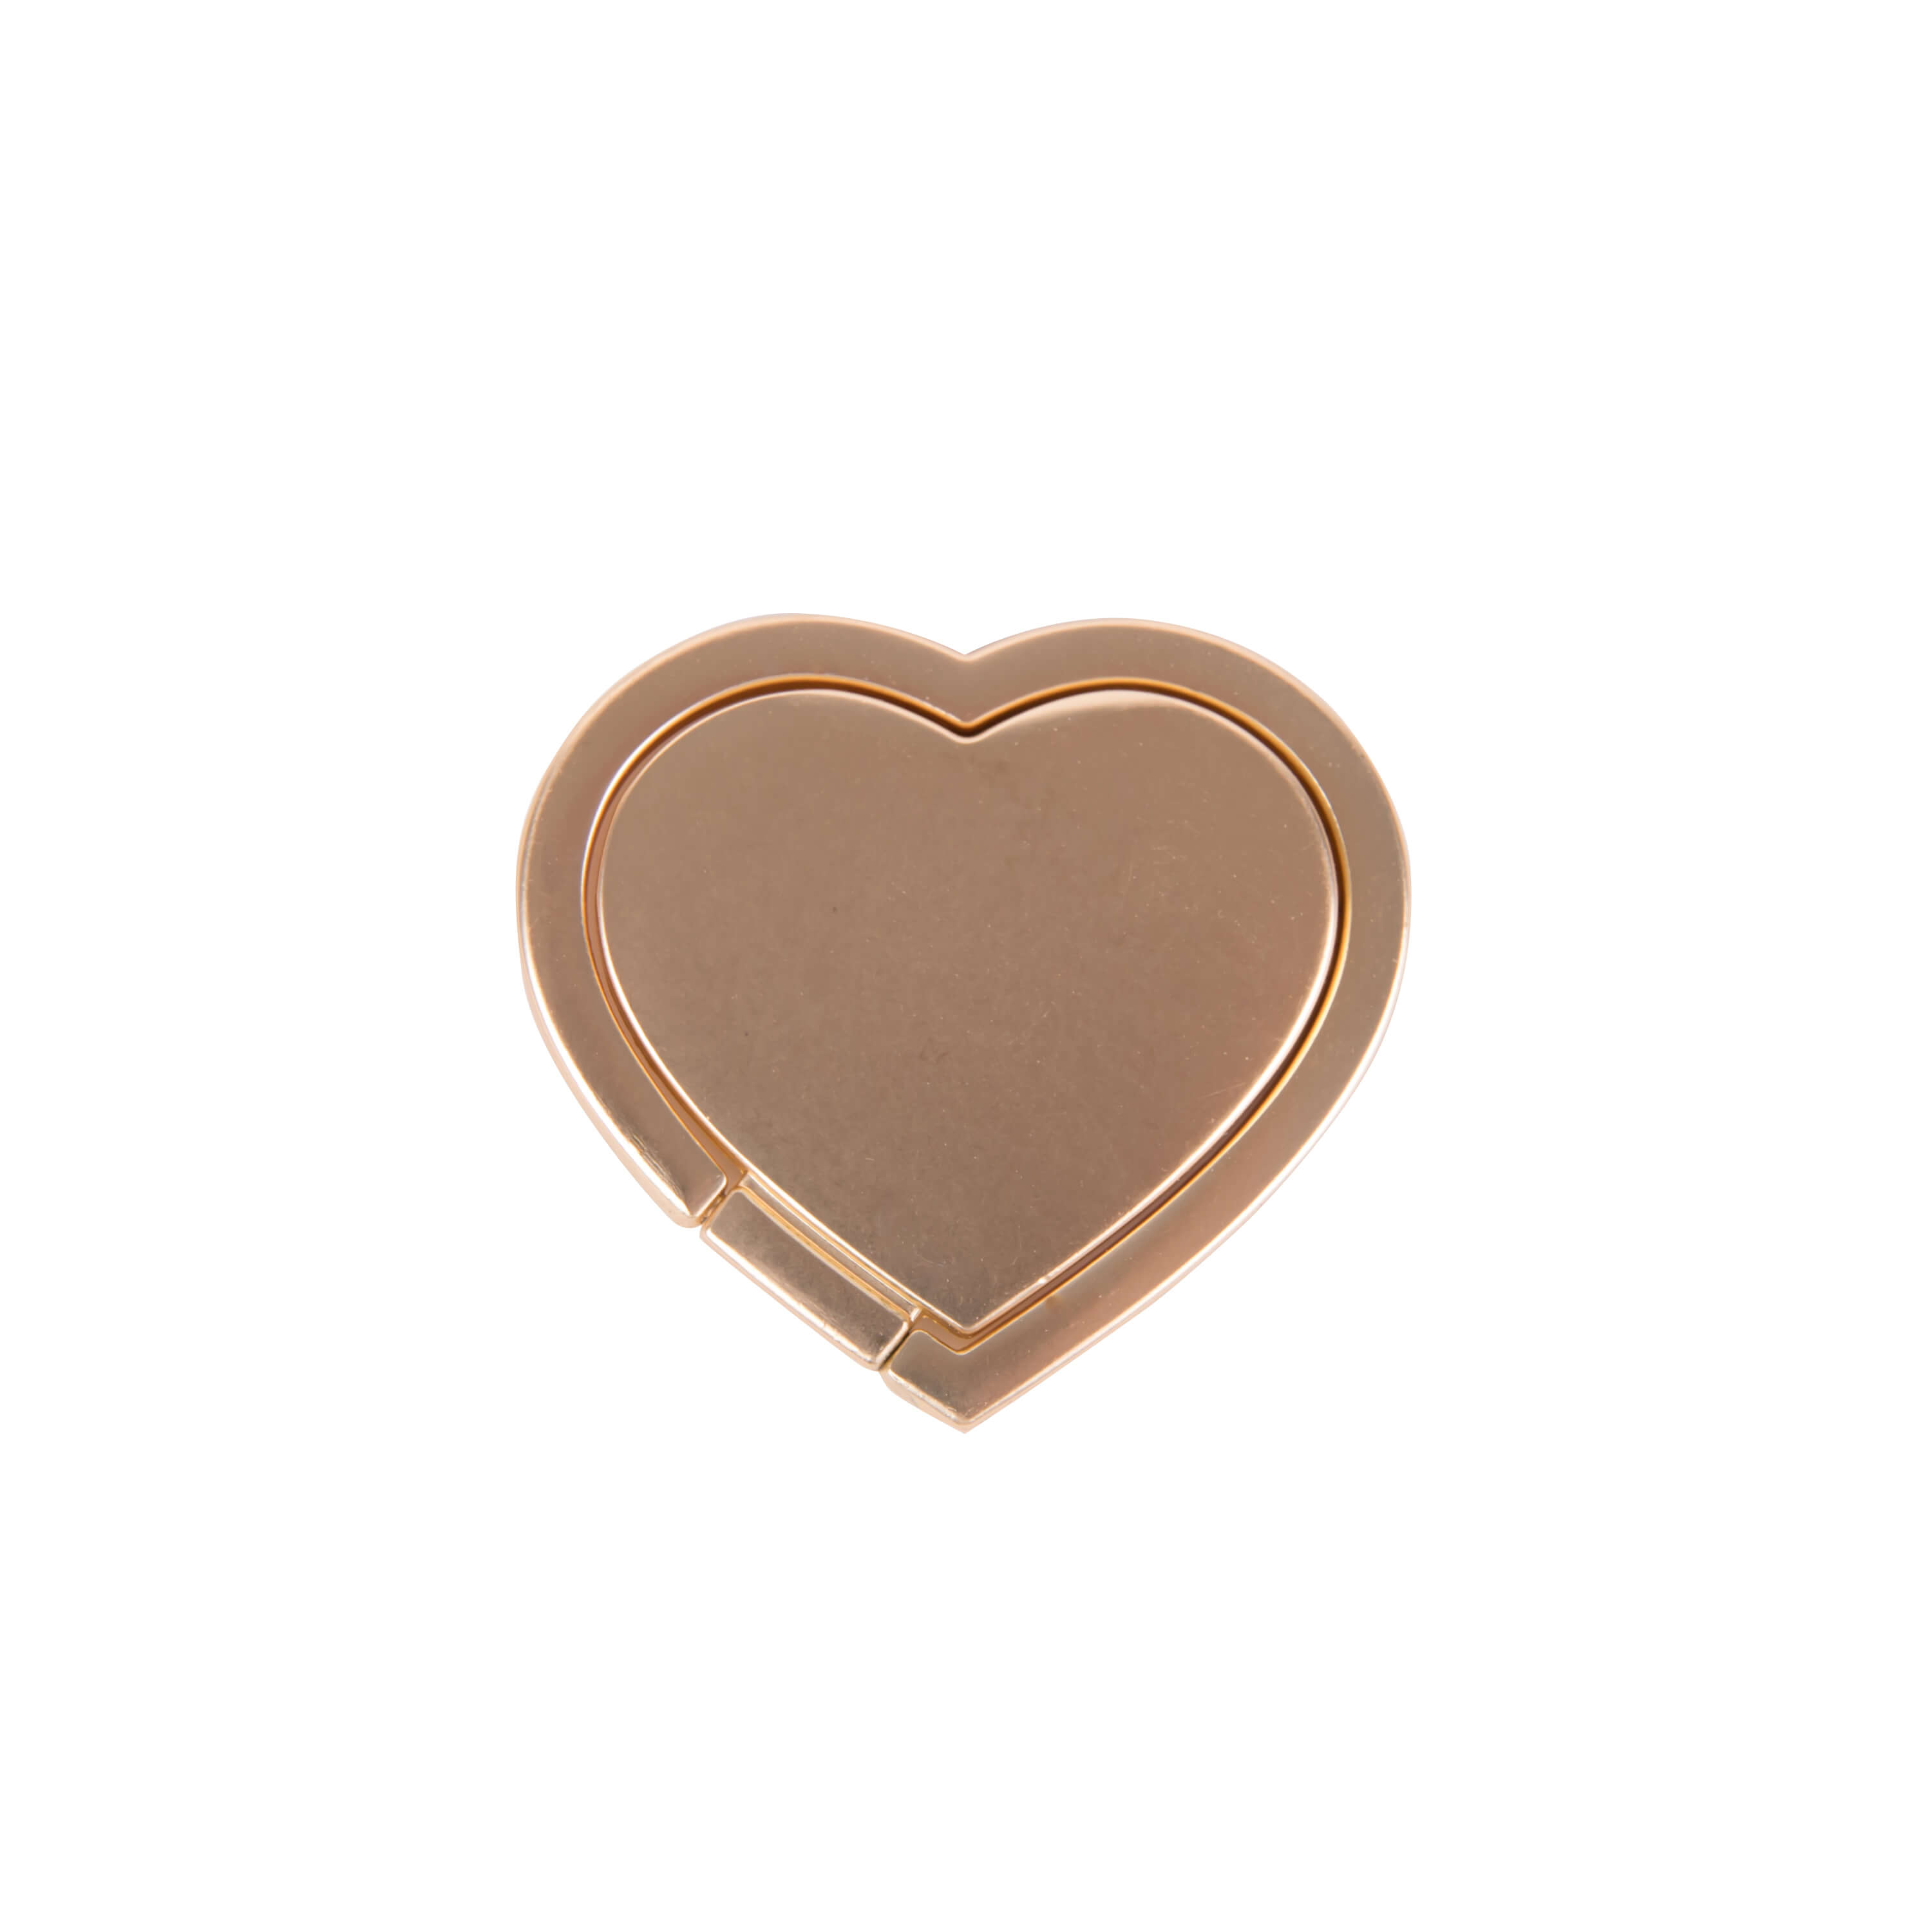 Finger ring heart gold with stand function